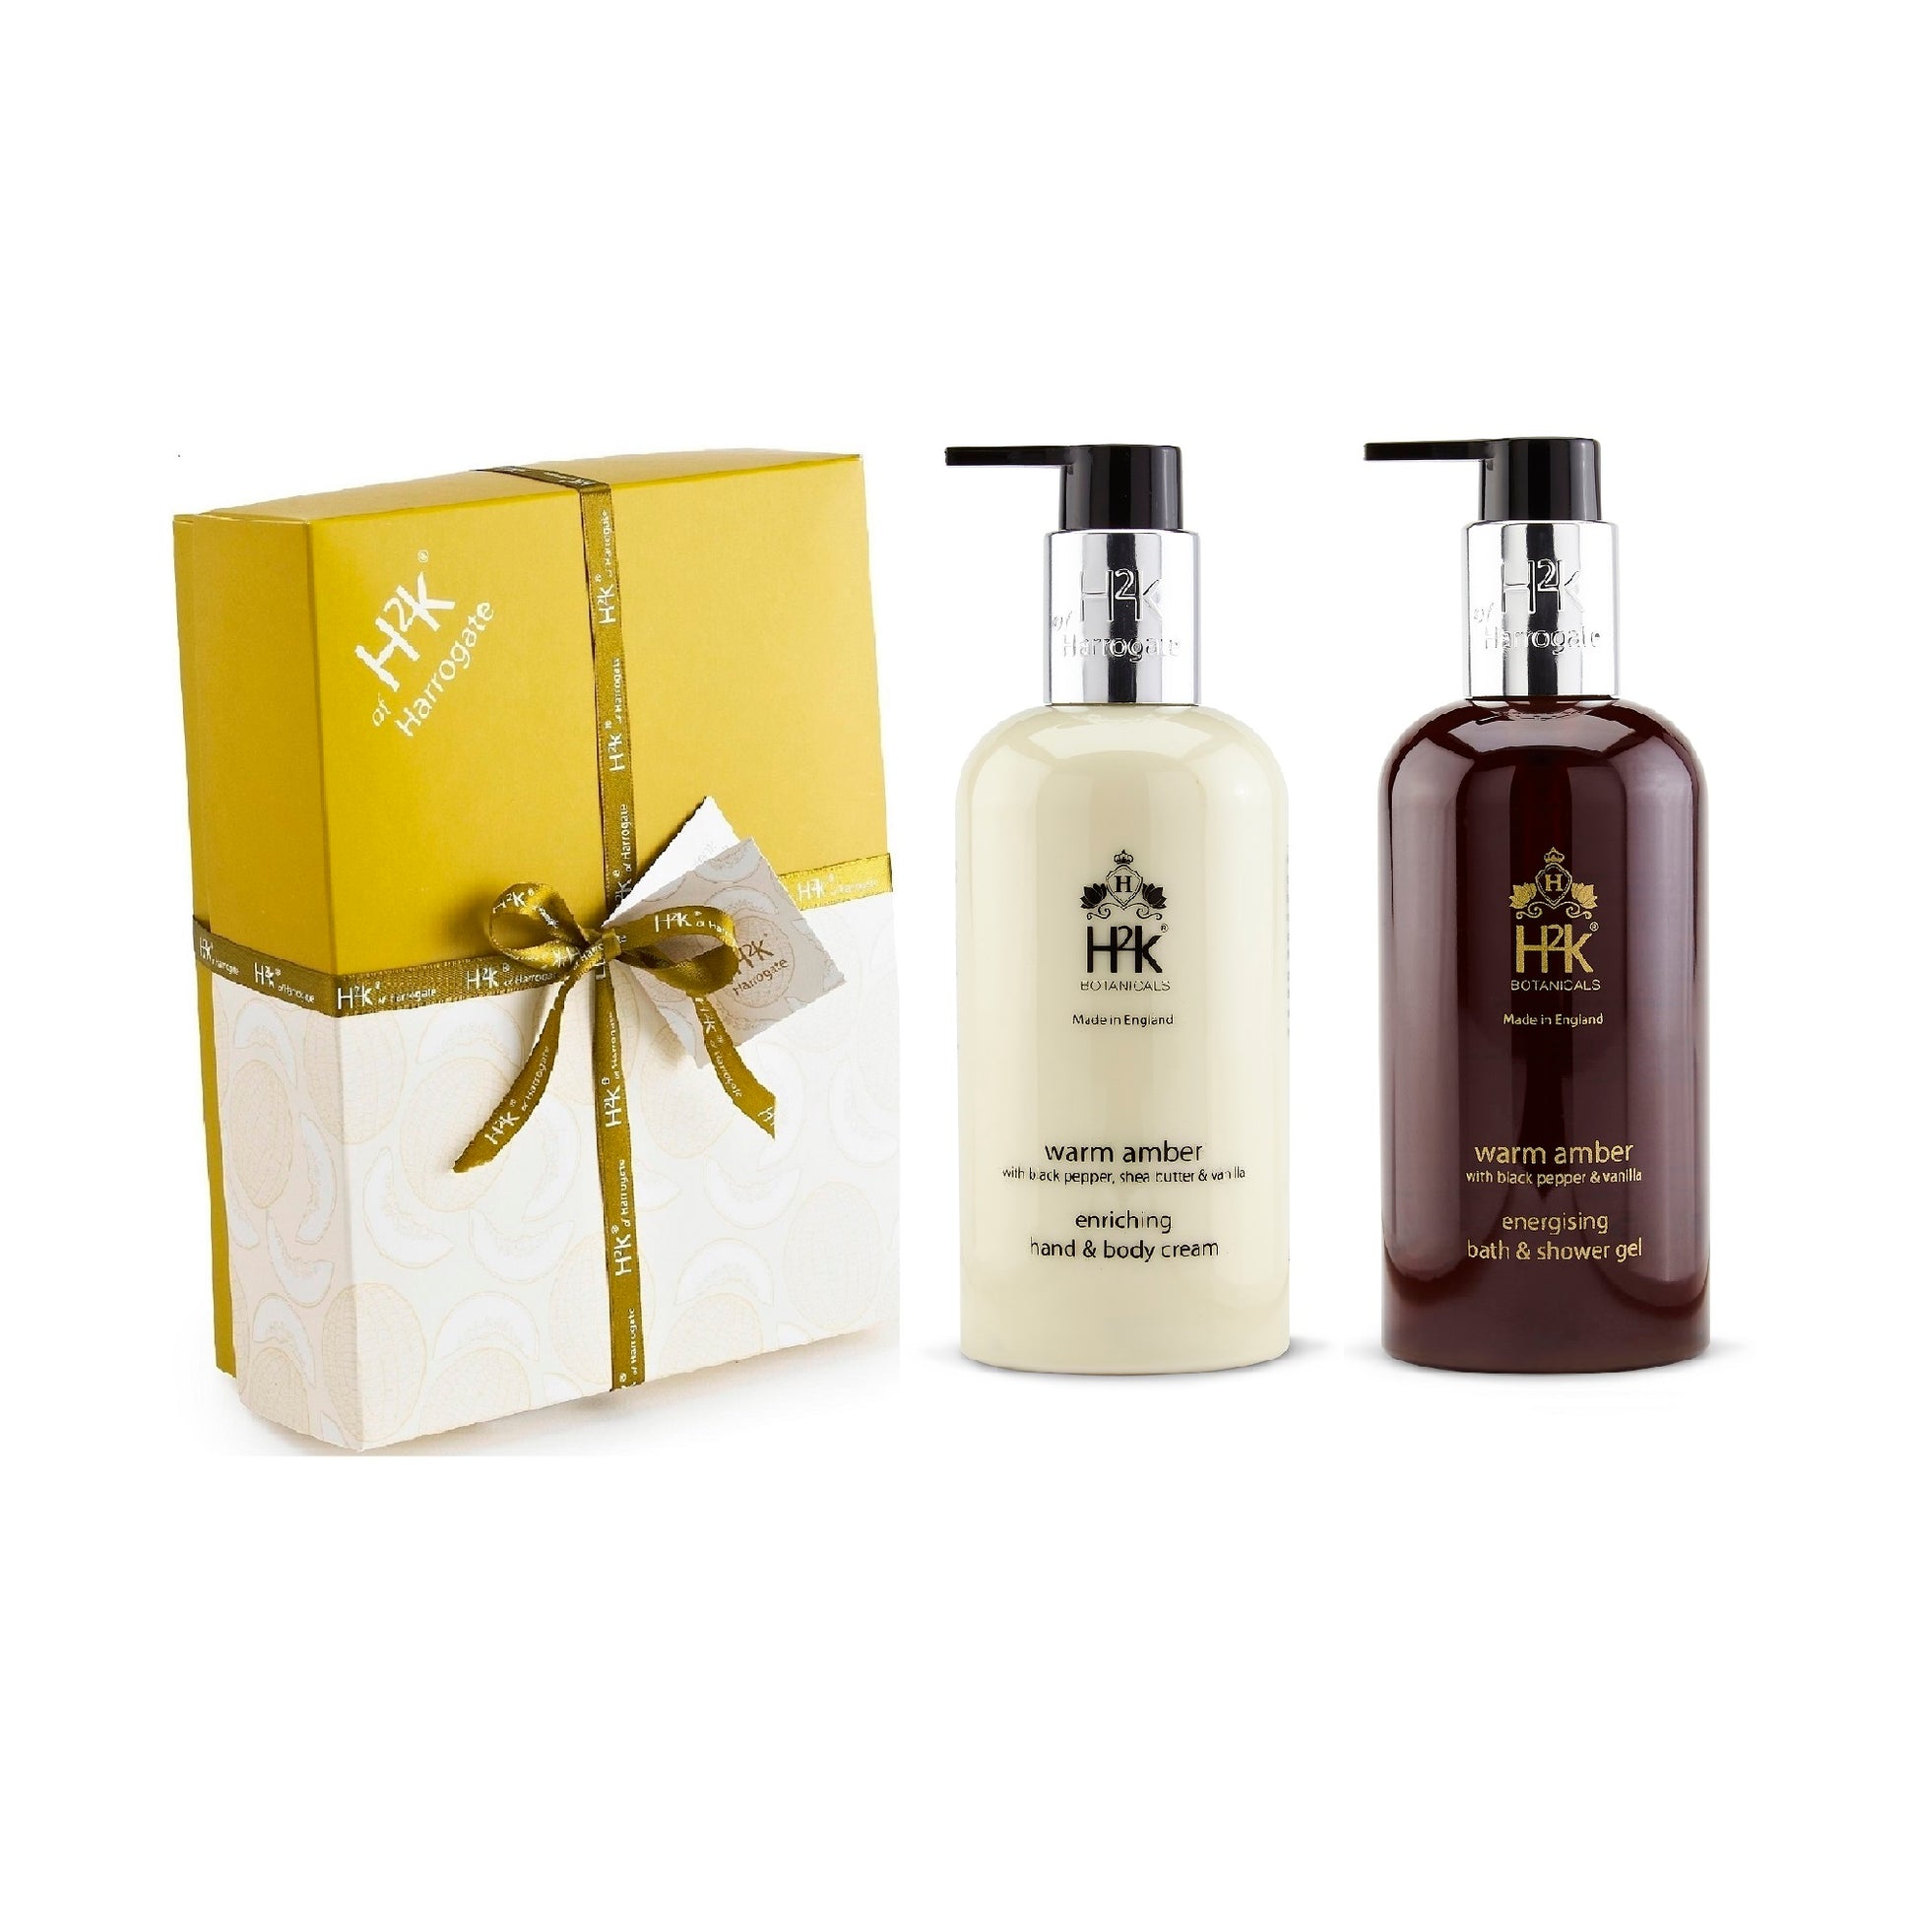 Black Pepper and Vanilla Body Care Gift - Warm Amber Collection.